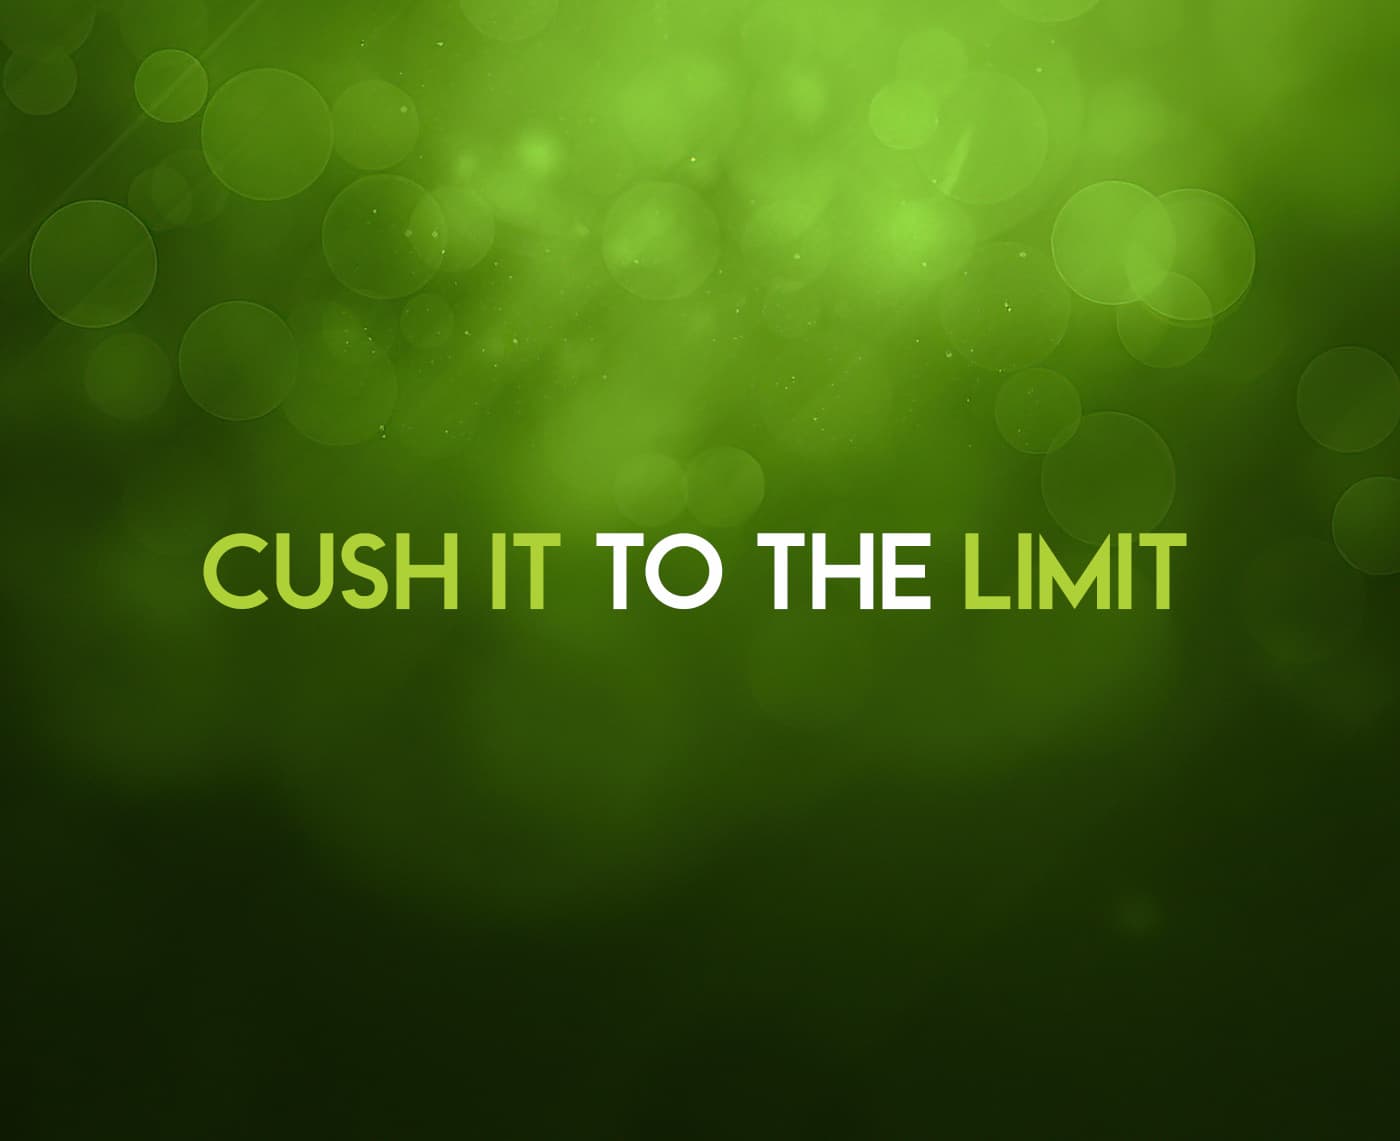 CUSH IT TO THE LIMIT